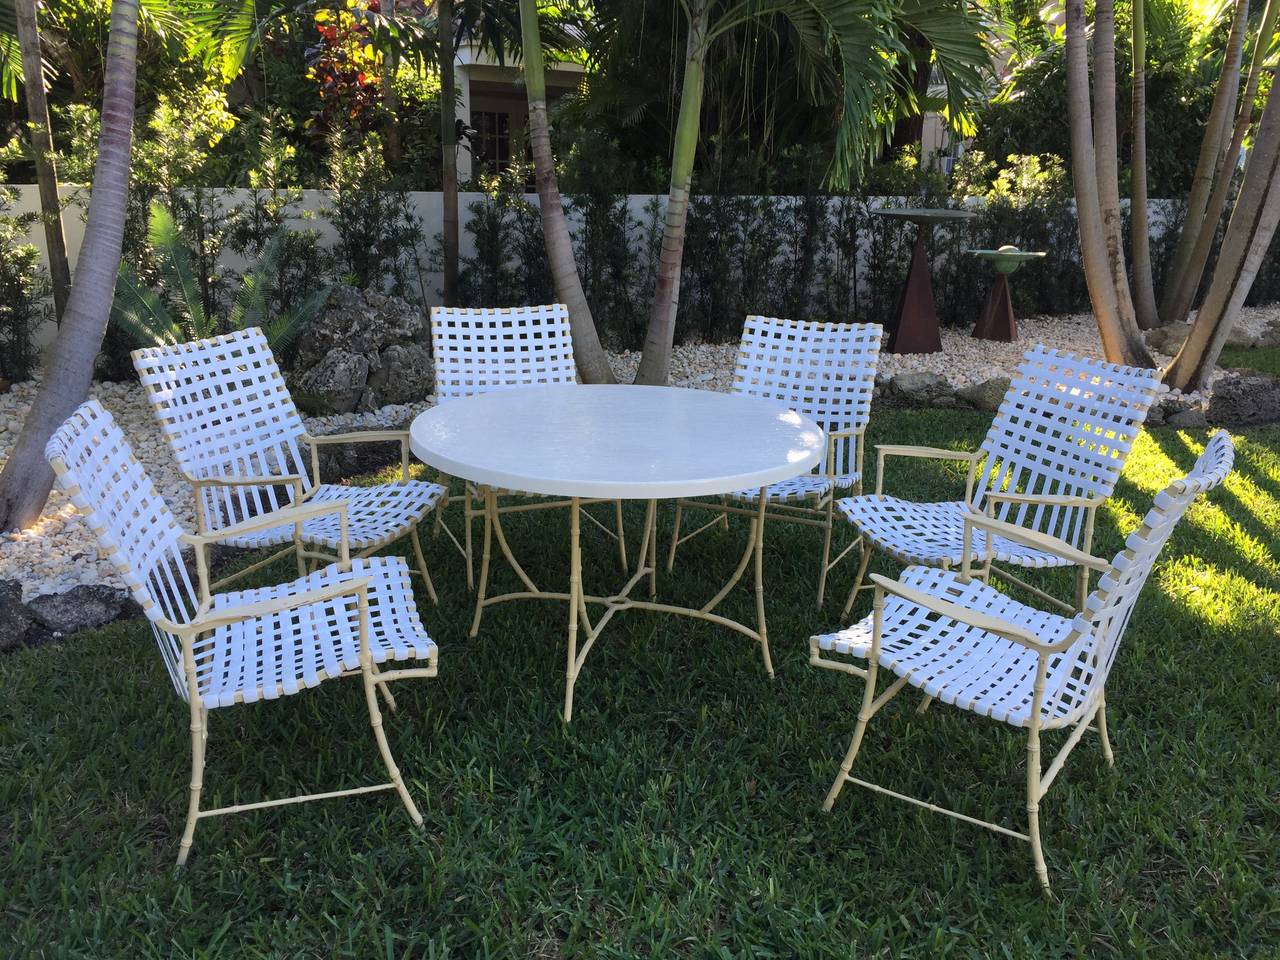 American Amazing Vintage 13-Piece Faux Bamboo Style Garden Set